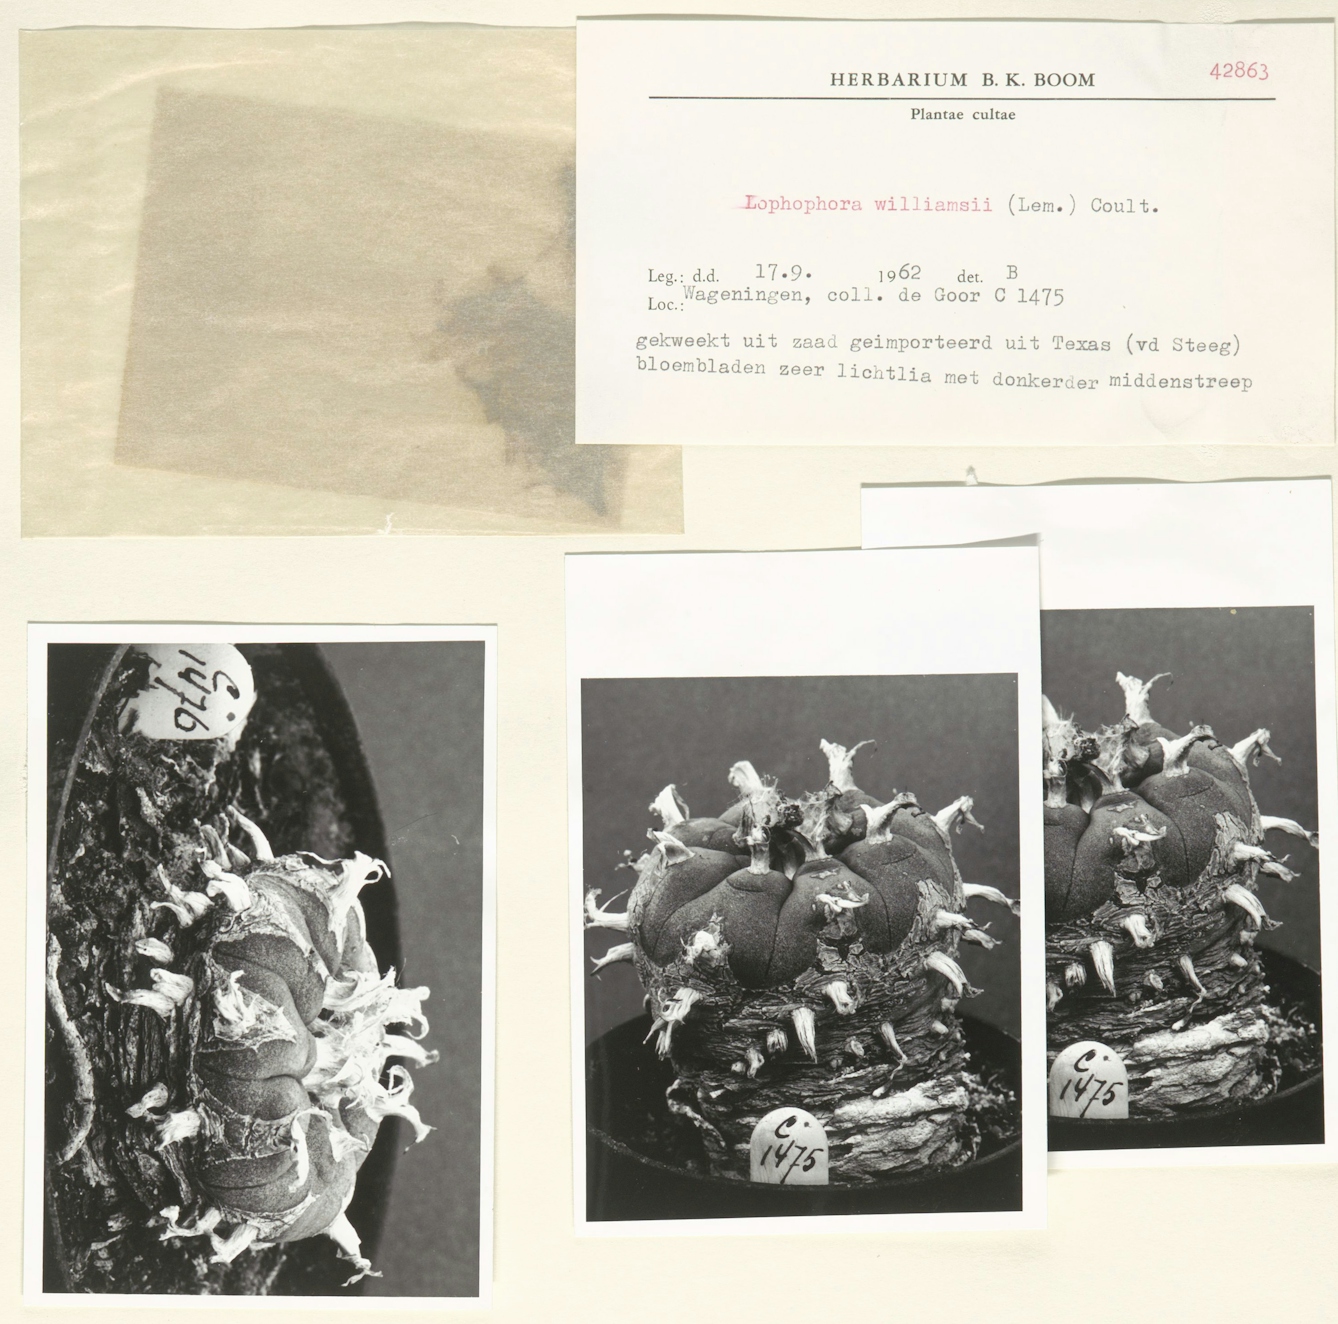 Botany specimen document page including a typed card with plant name lophophora williamsii (Lem.) Coult. and dated 1962, plus a sample of the cactus plant and three black and white photographs. 